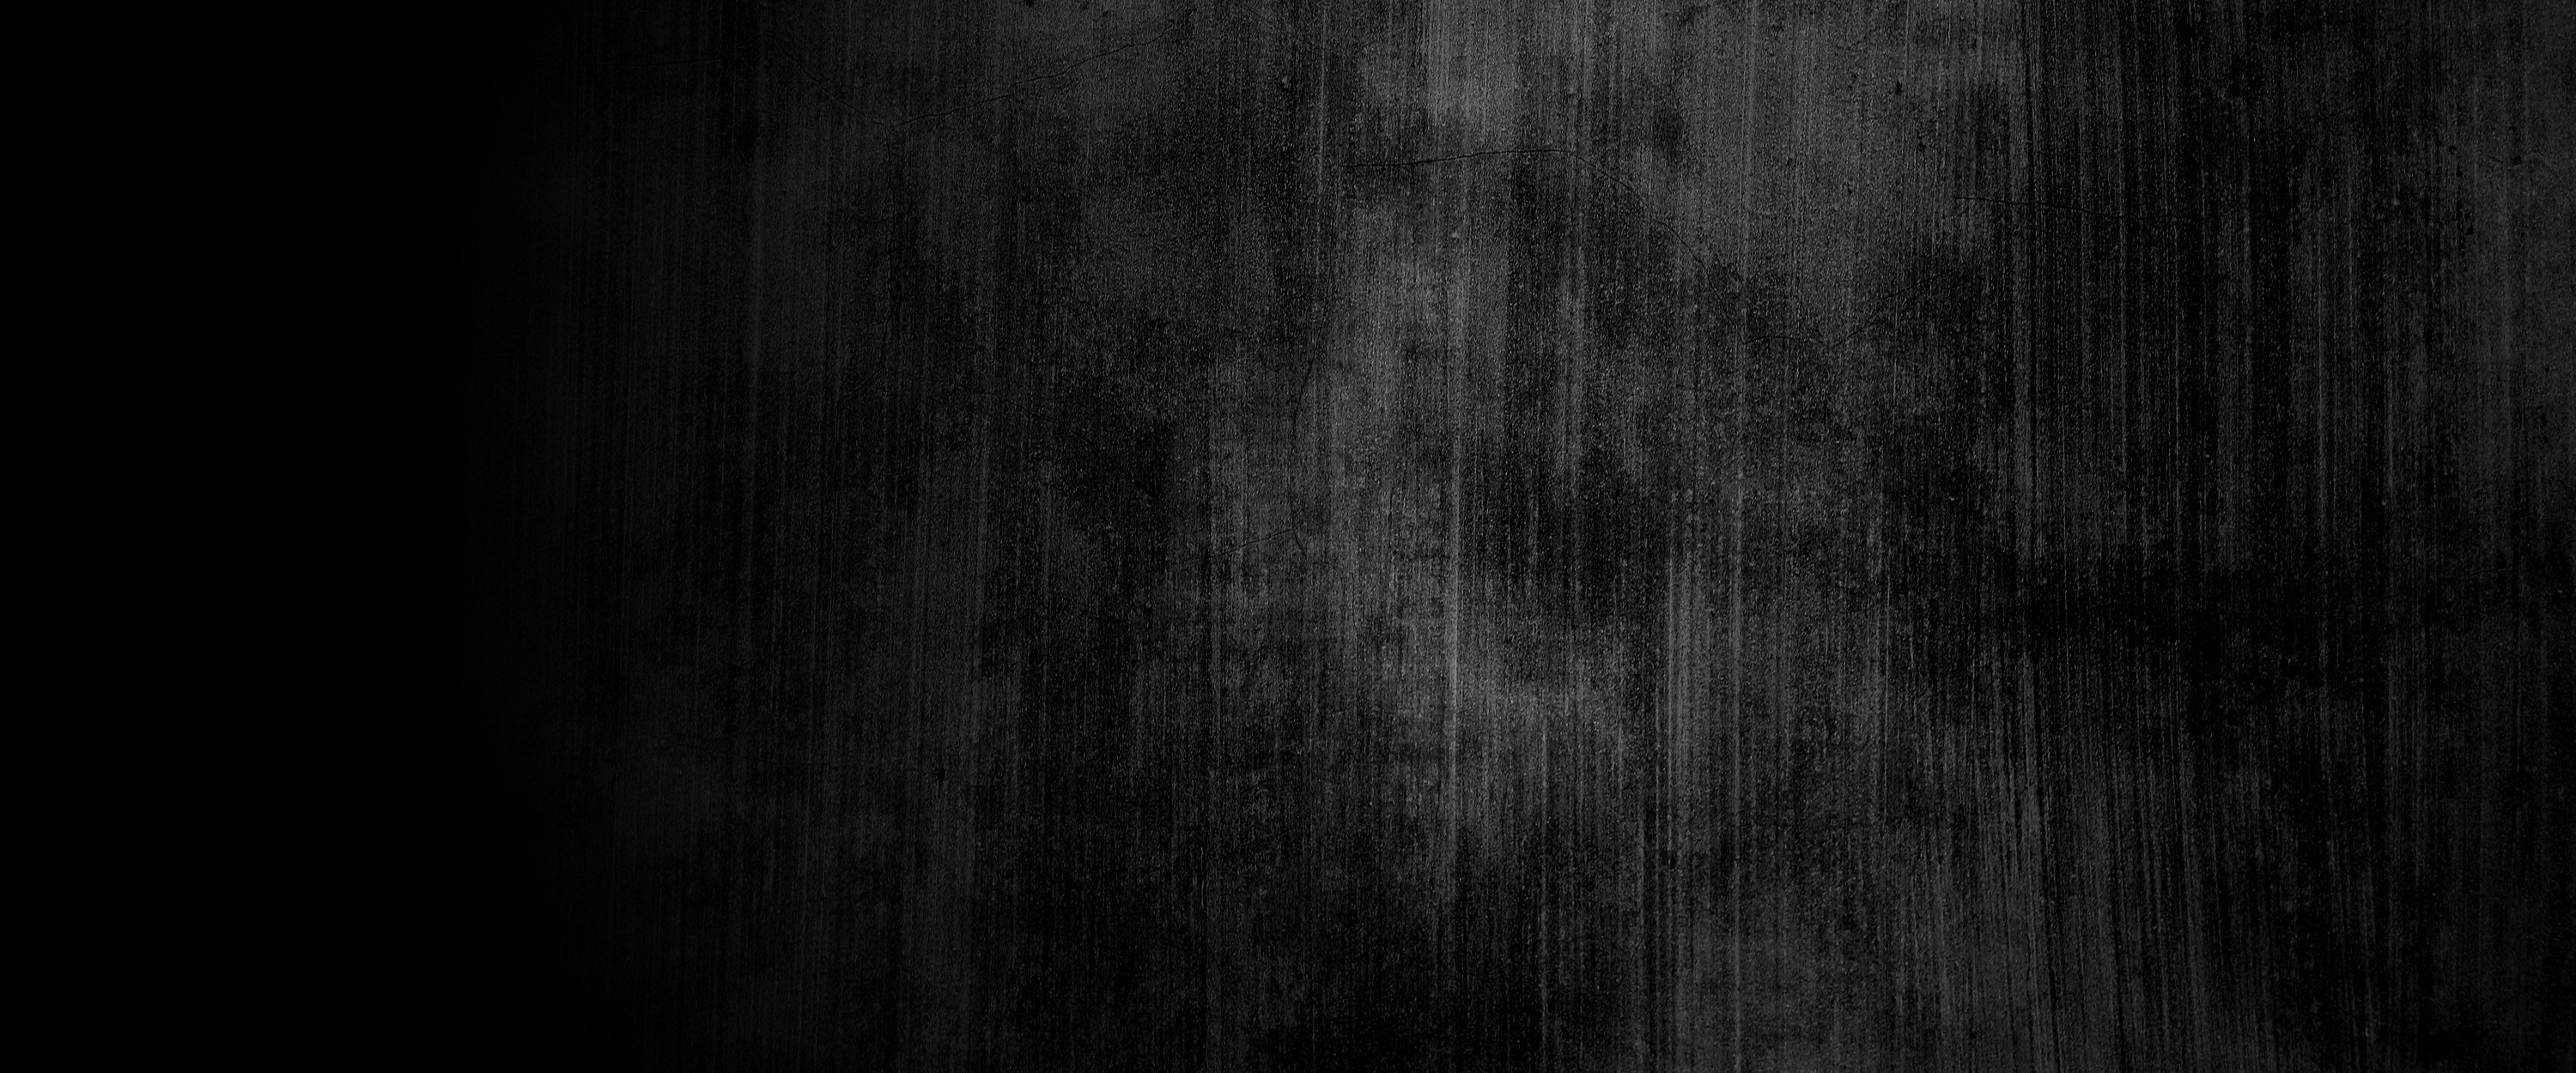 Dark Scary Wall Background. Horror Cement Background